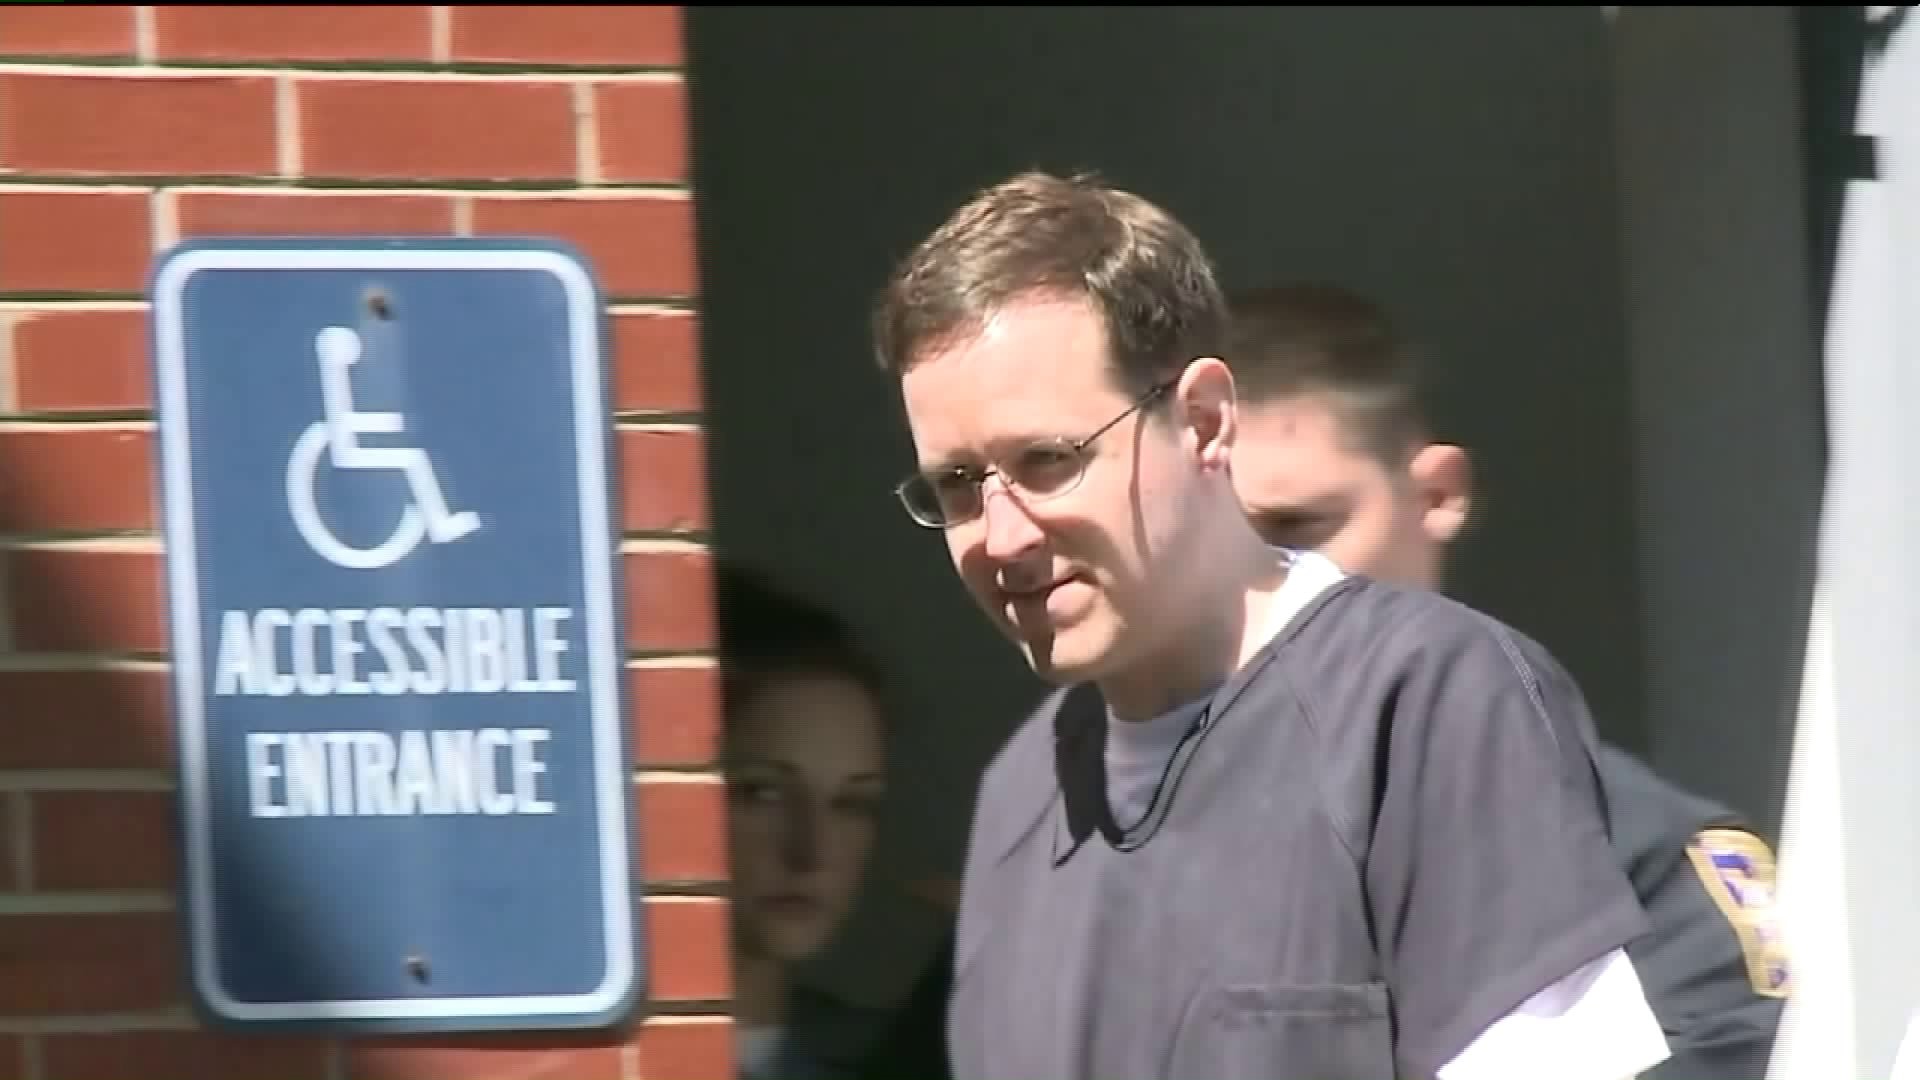 Judge: 'The Eric Frein story ends today'